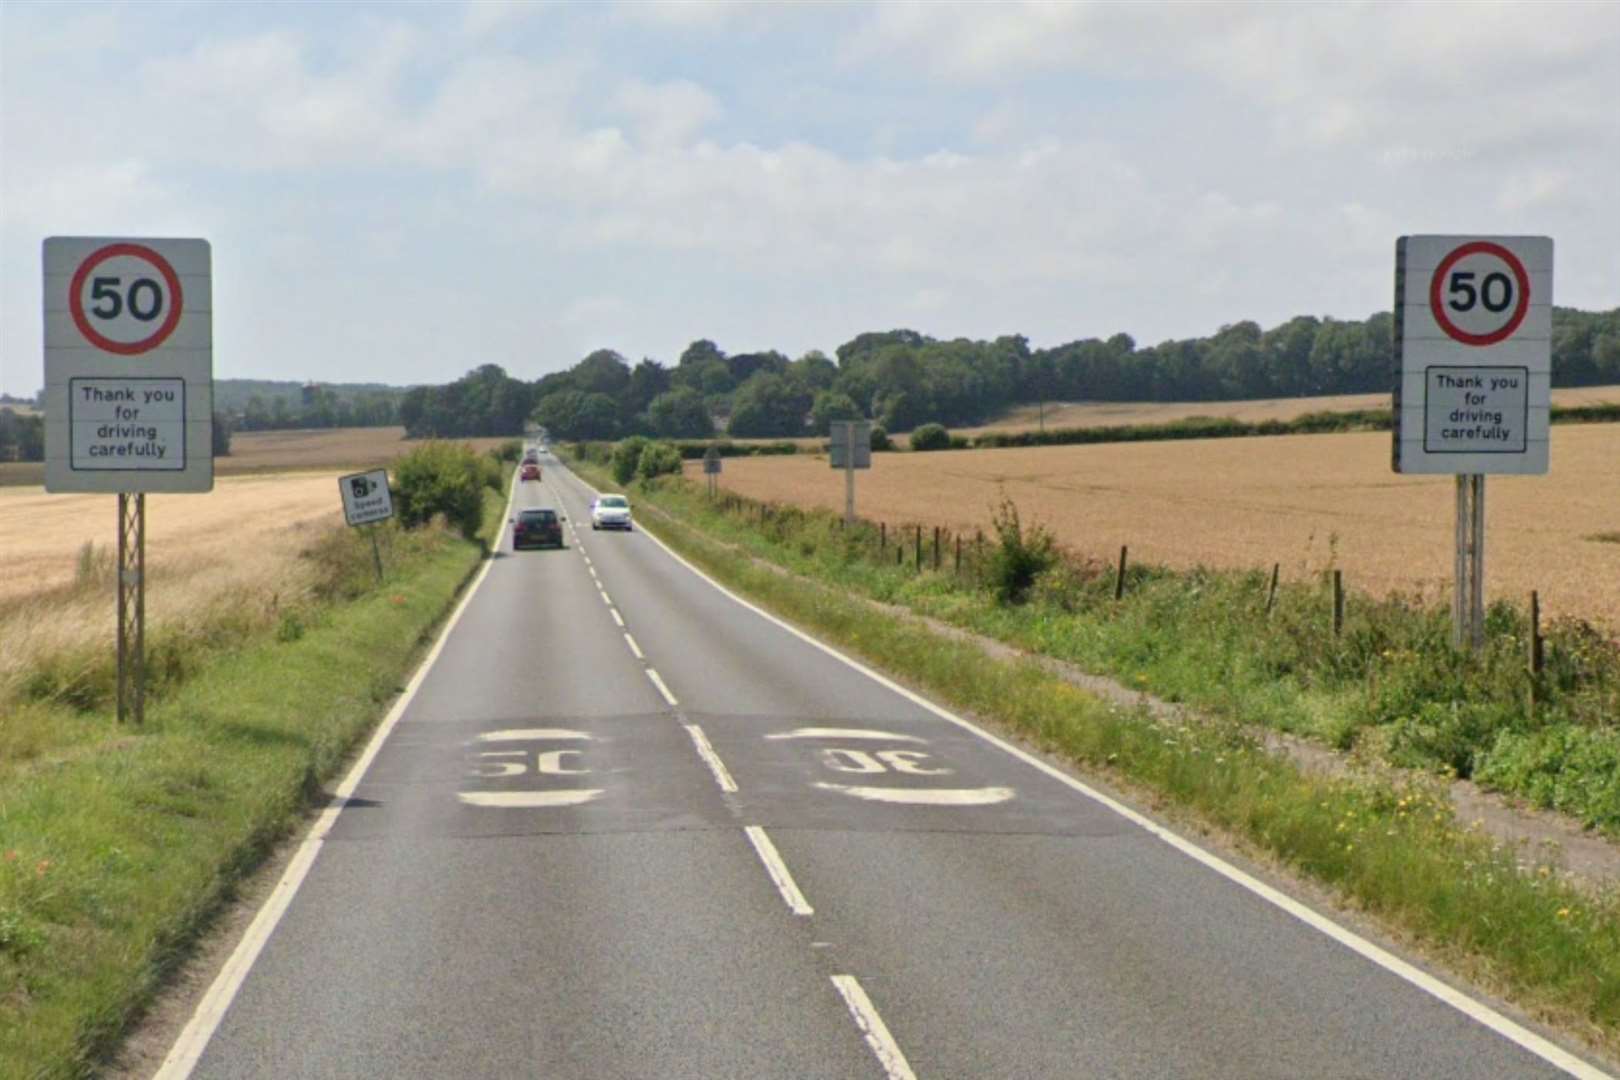 The accident occurred on the A258 Dover Road near Deal. Photo: Google Street View